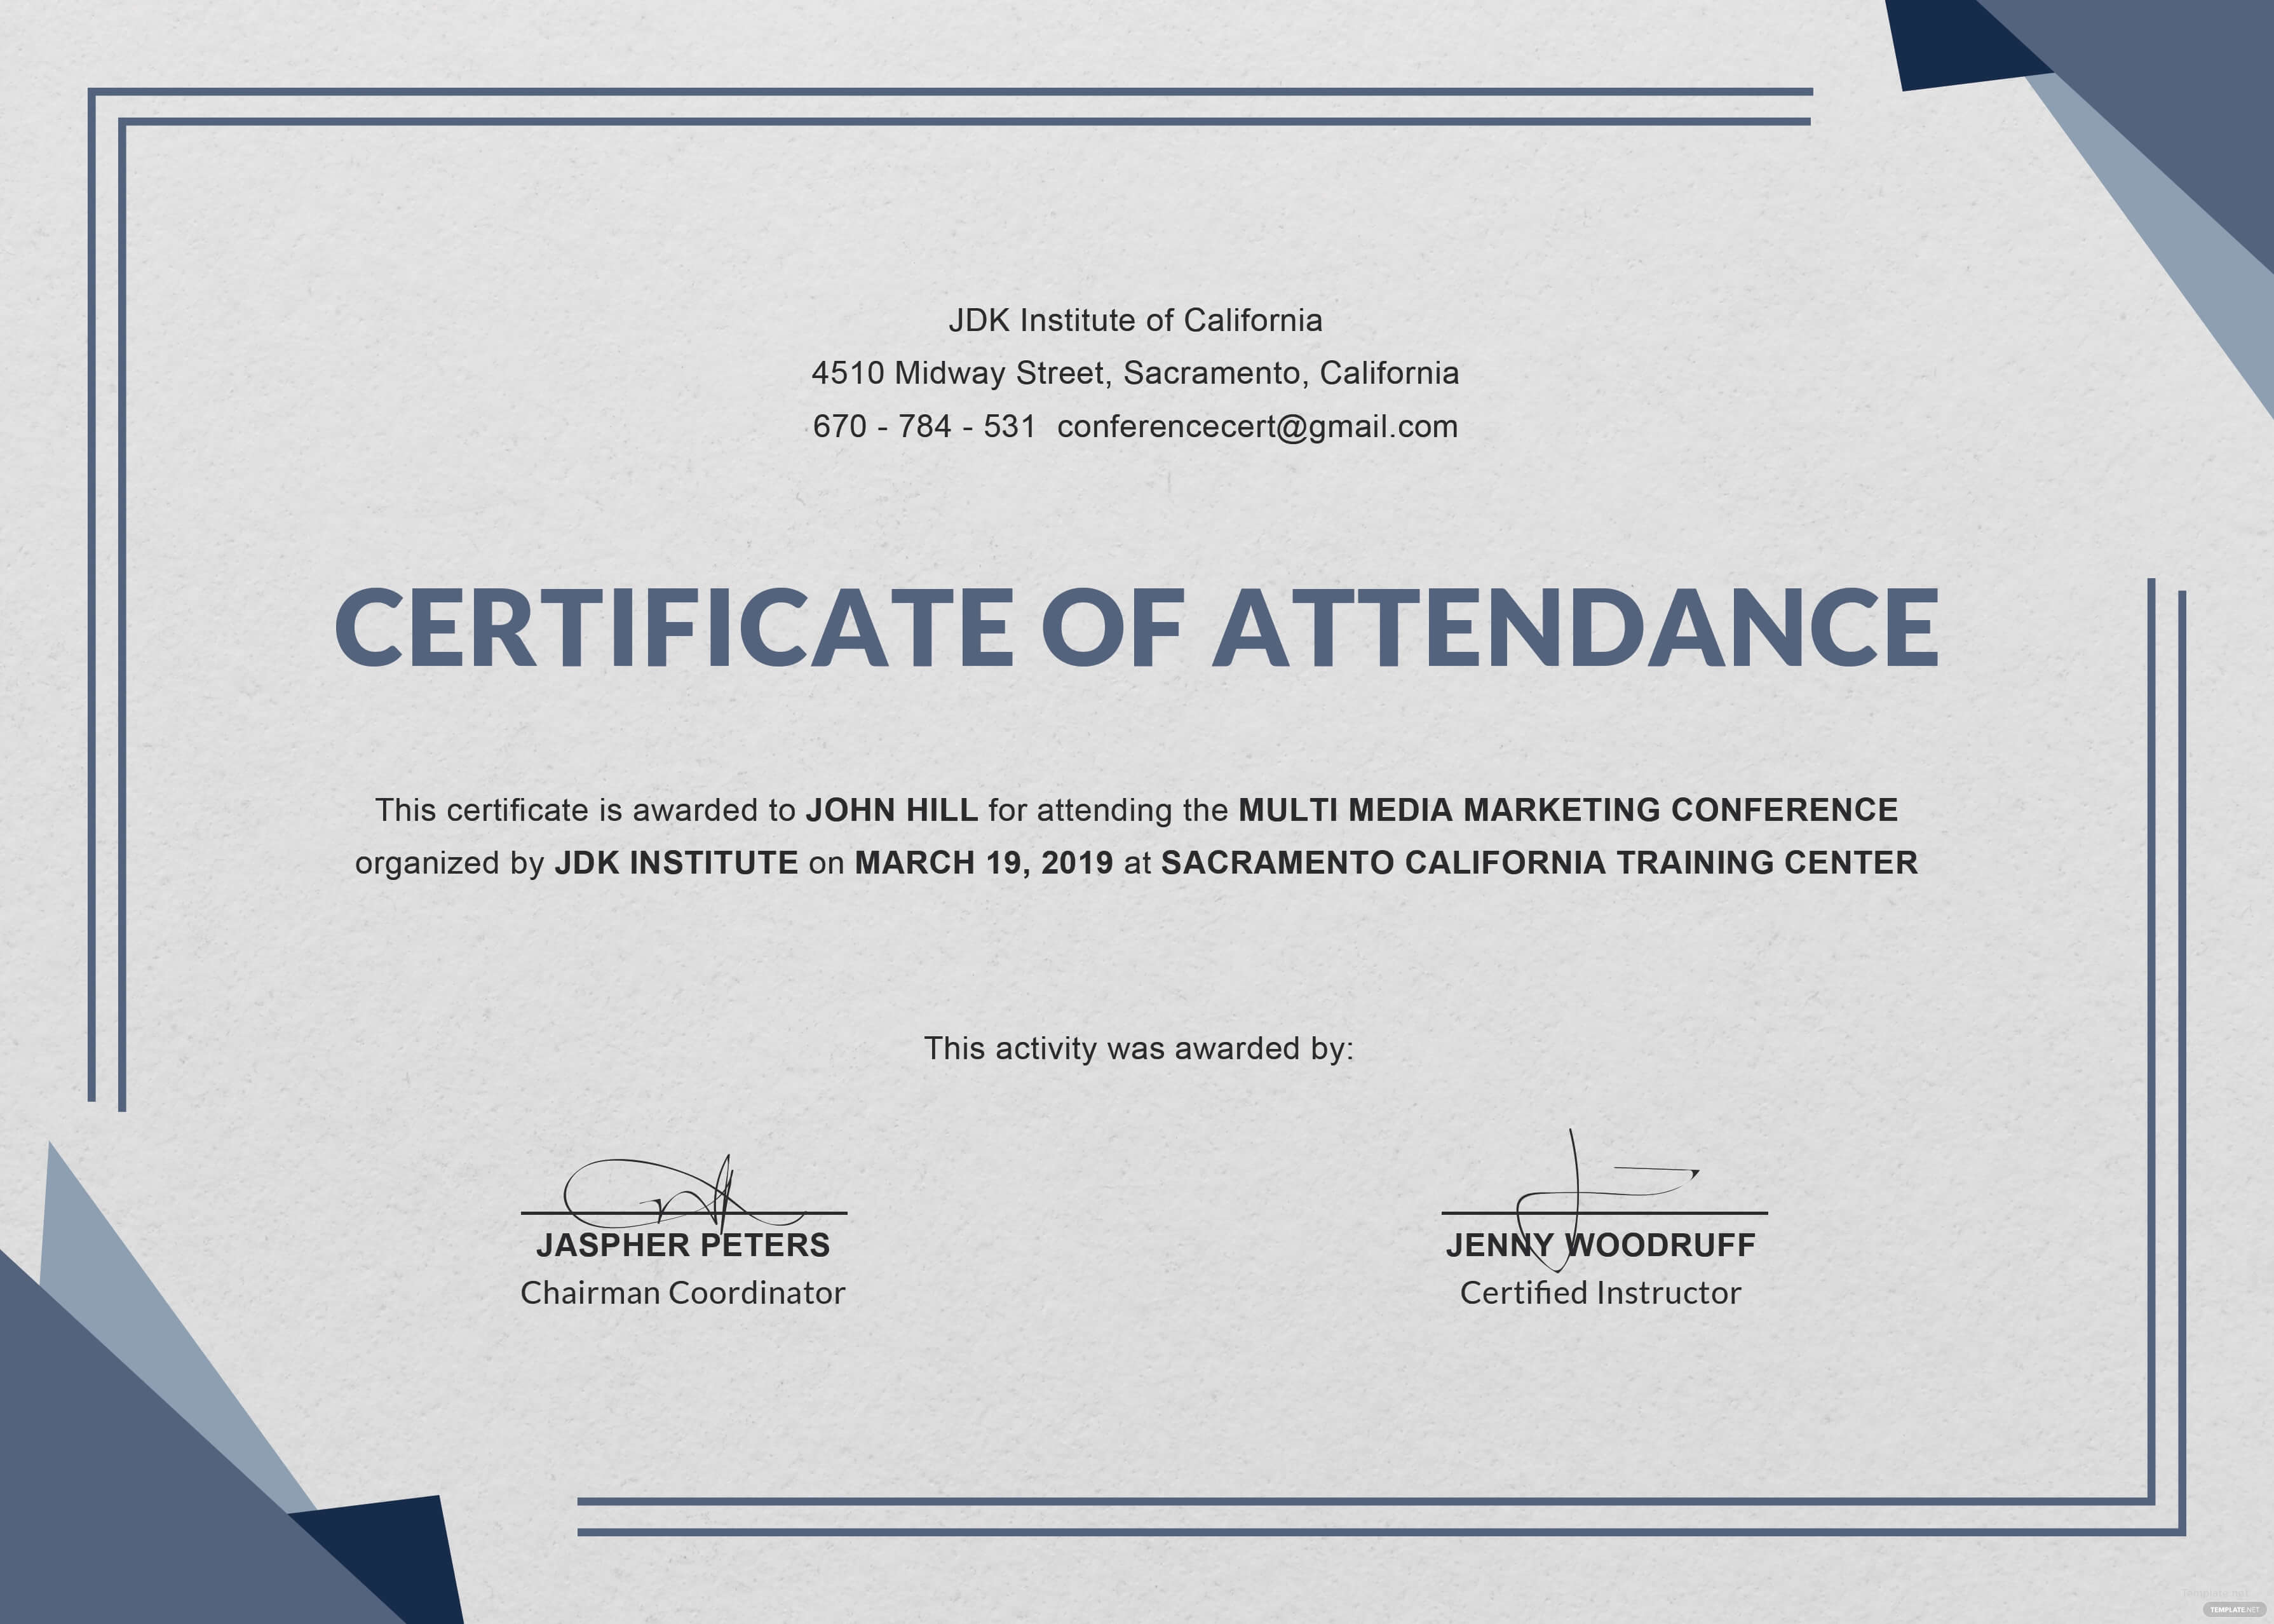 Attendance Certificate Template Free Perfect Employee Word Throughout Conference Certificate Of Attendance Template